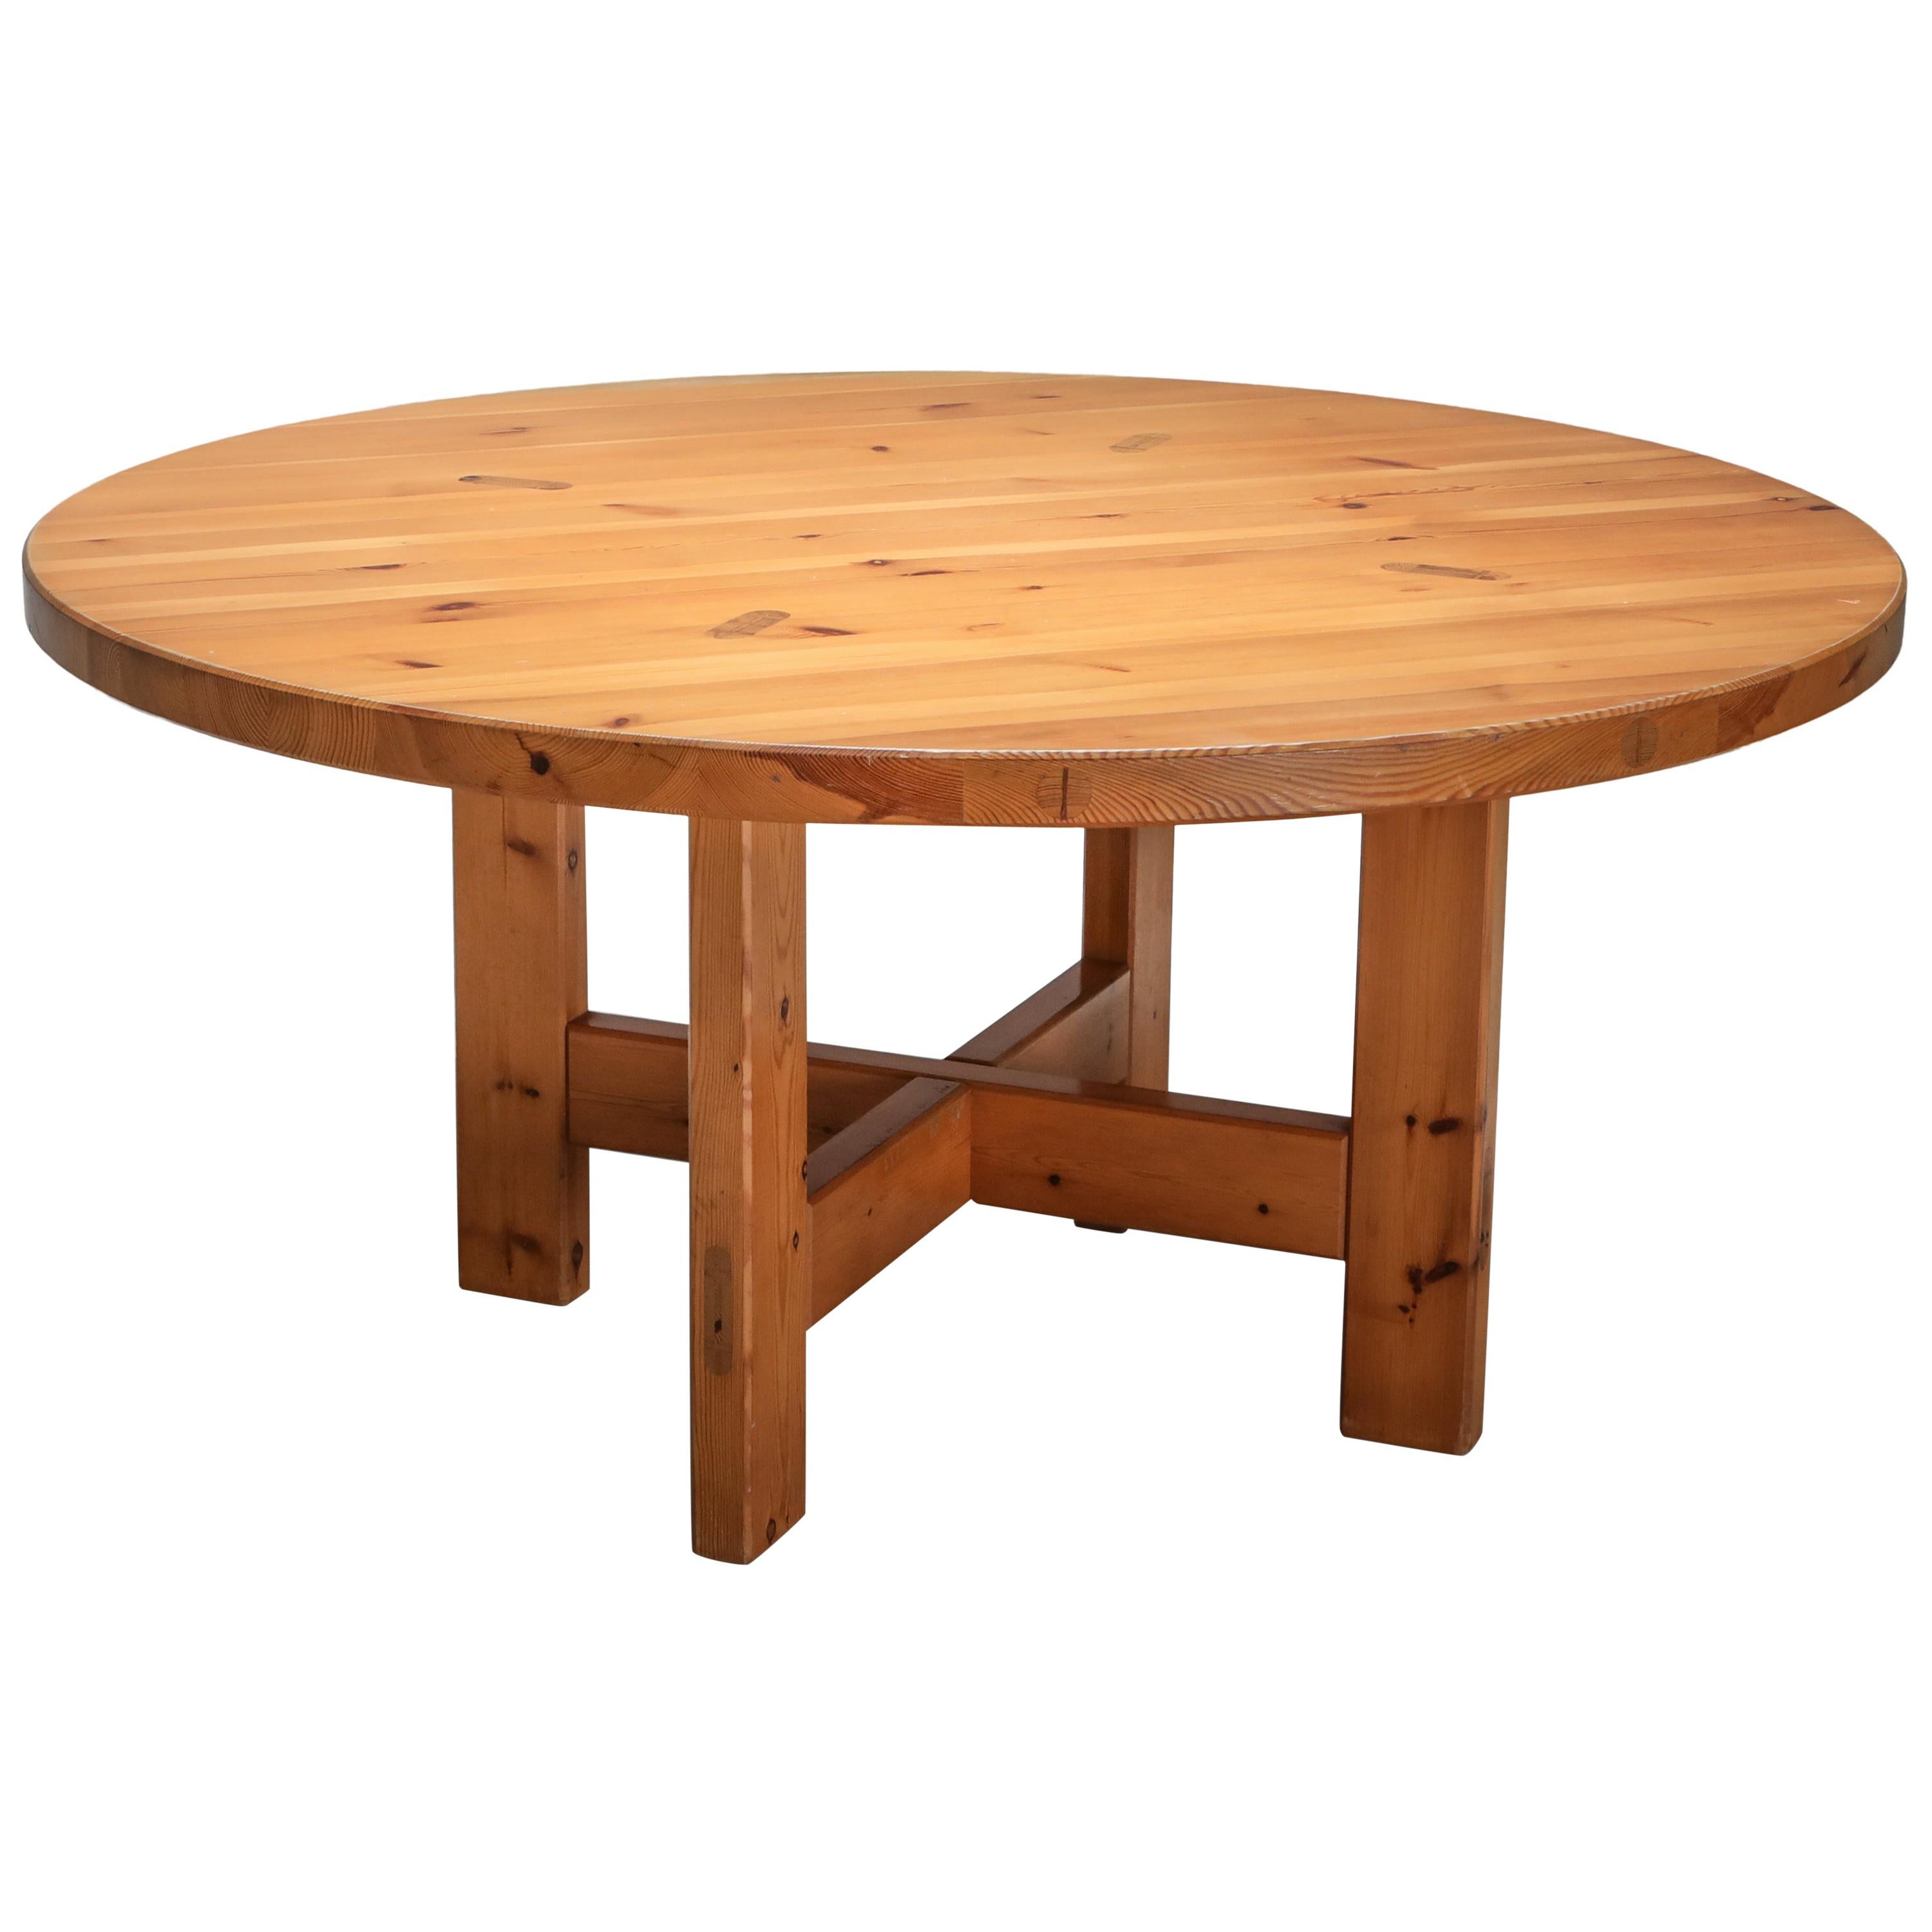 Roland Wilhelmsson Solid Pine Dining Table for Karl Anderson & Söner, Sweden